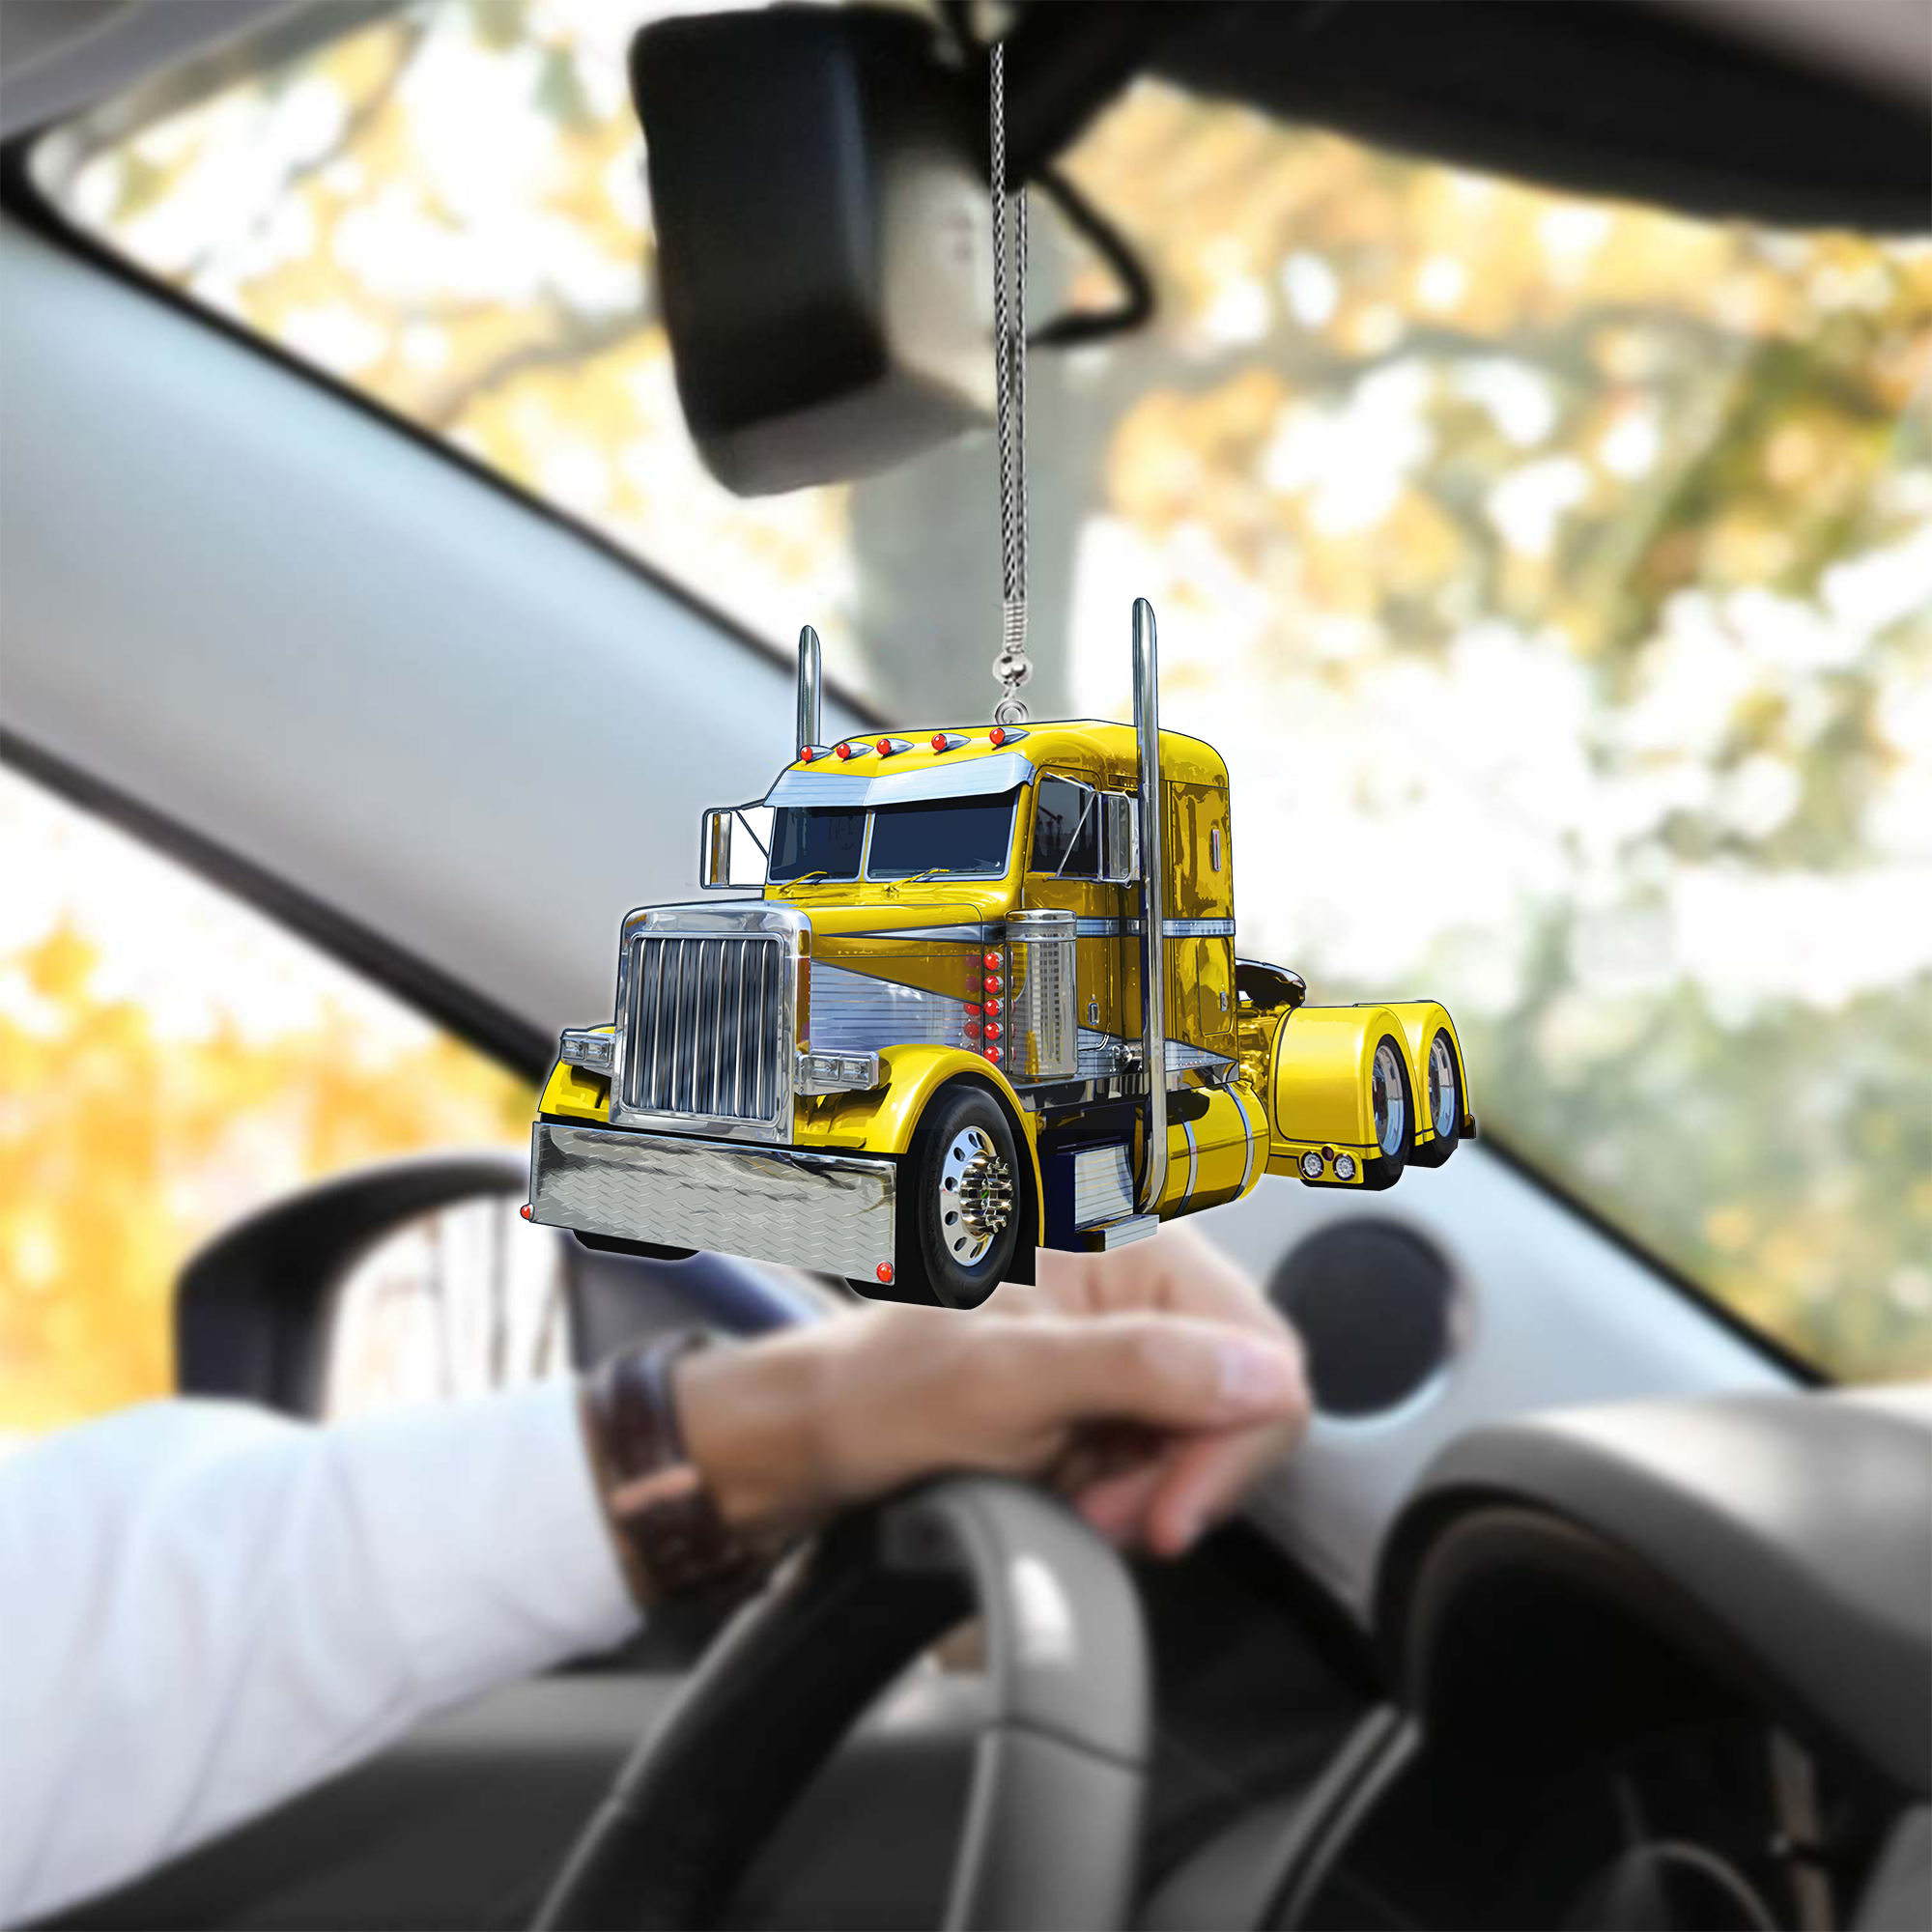 3D Yellow Truck Hanging Ornament For Auto Car Ornament